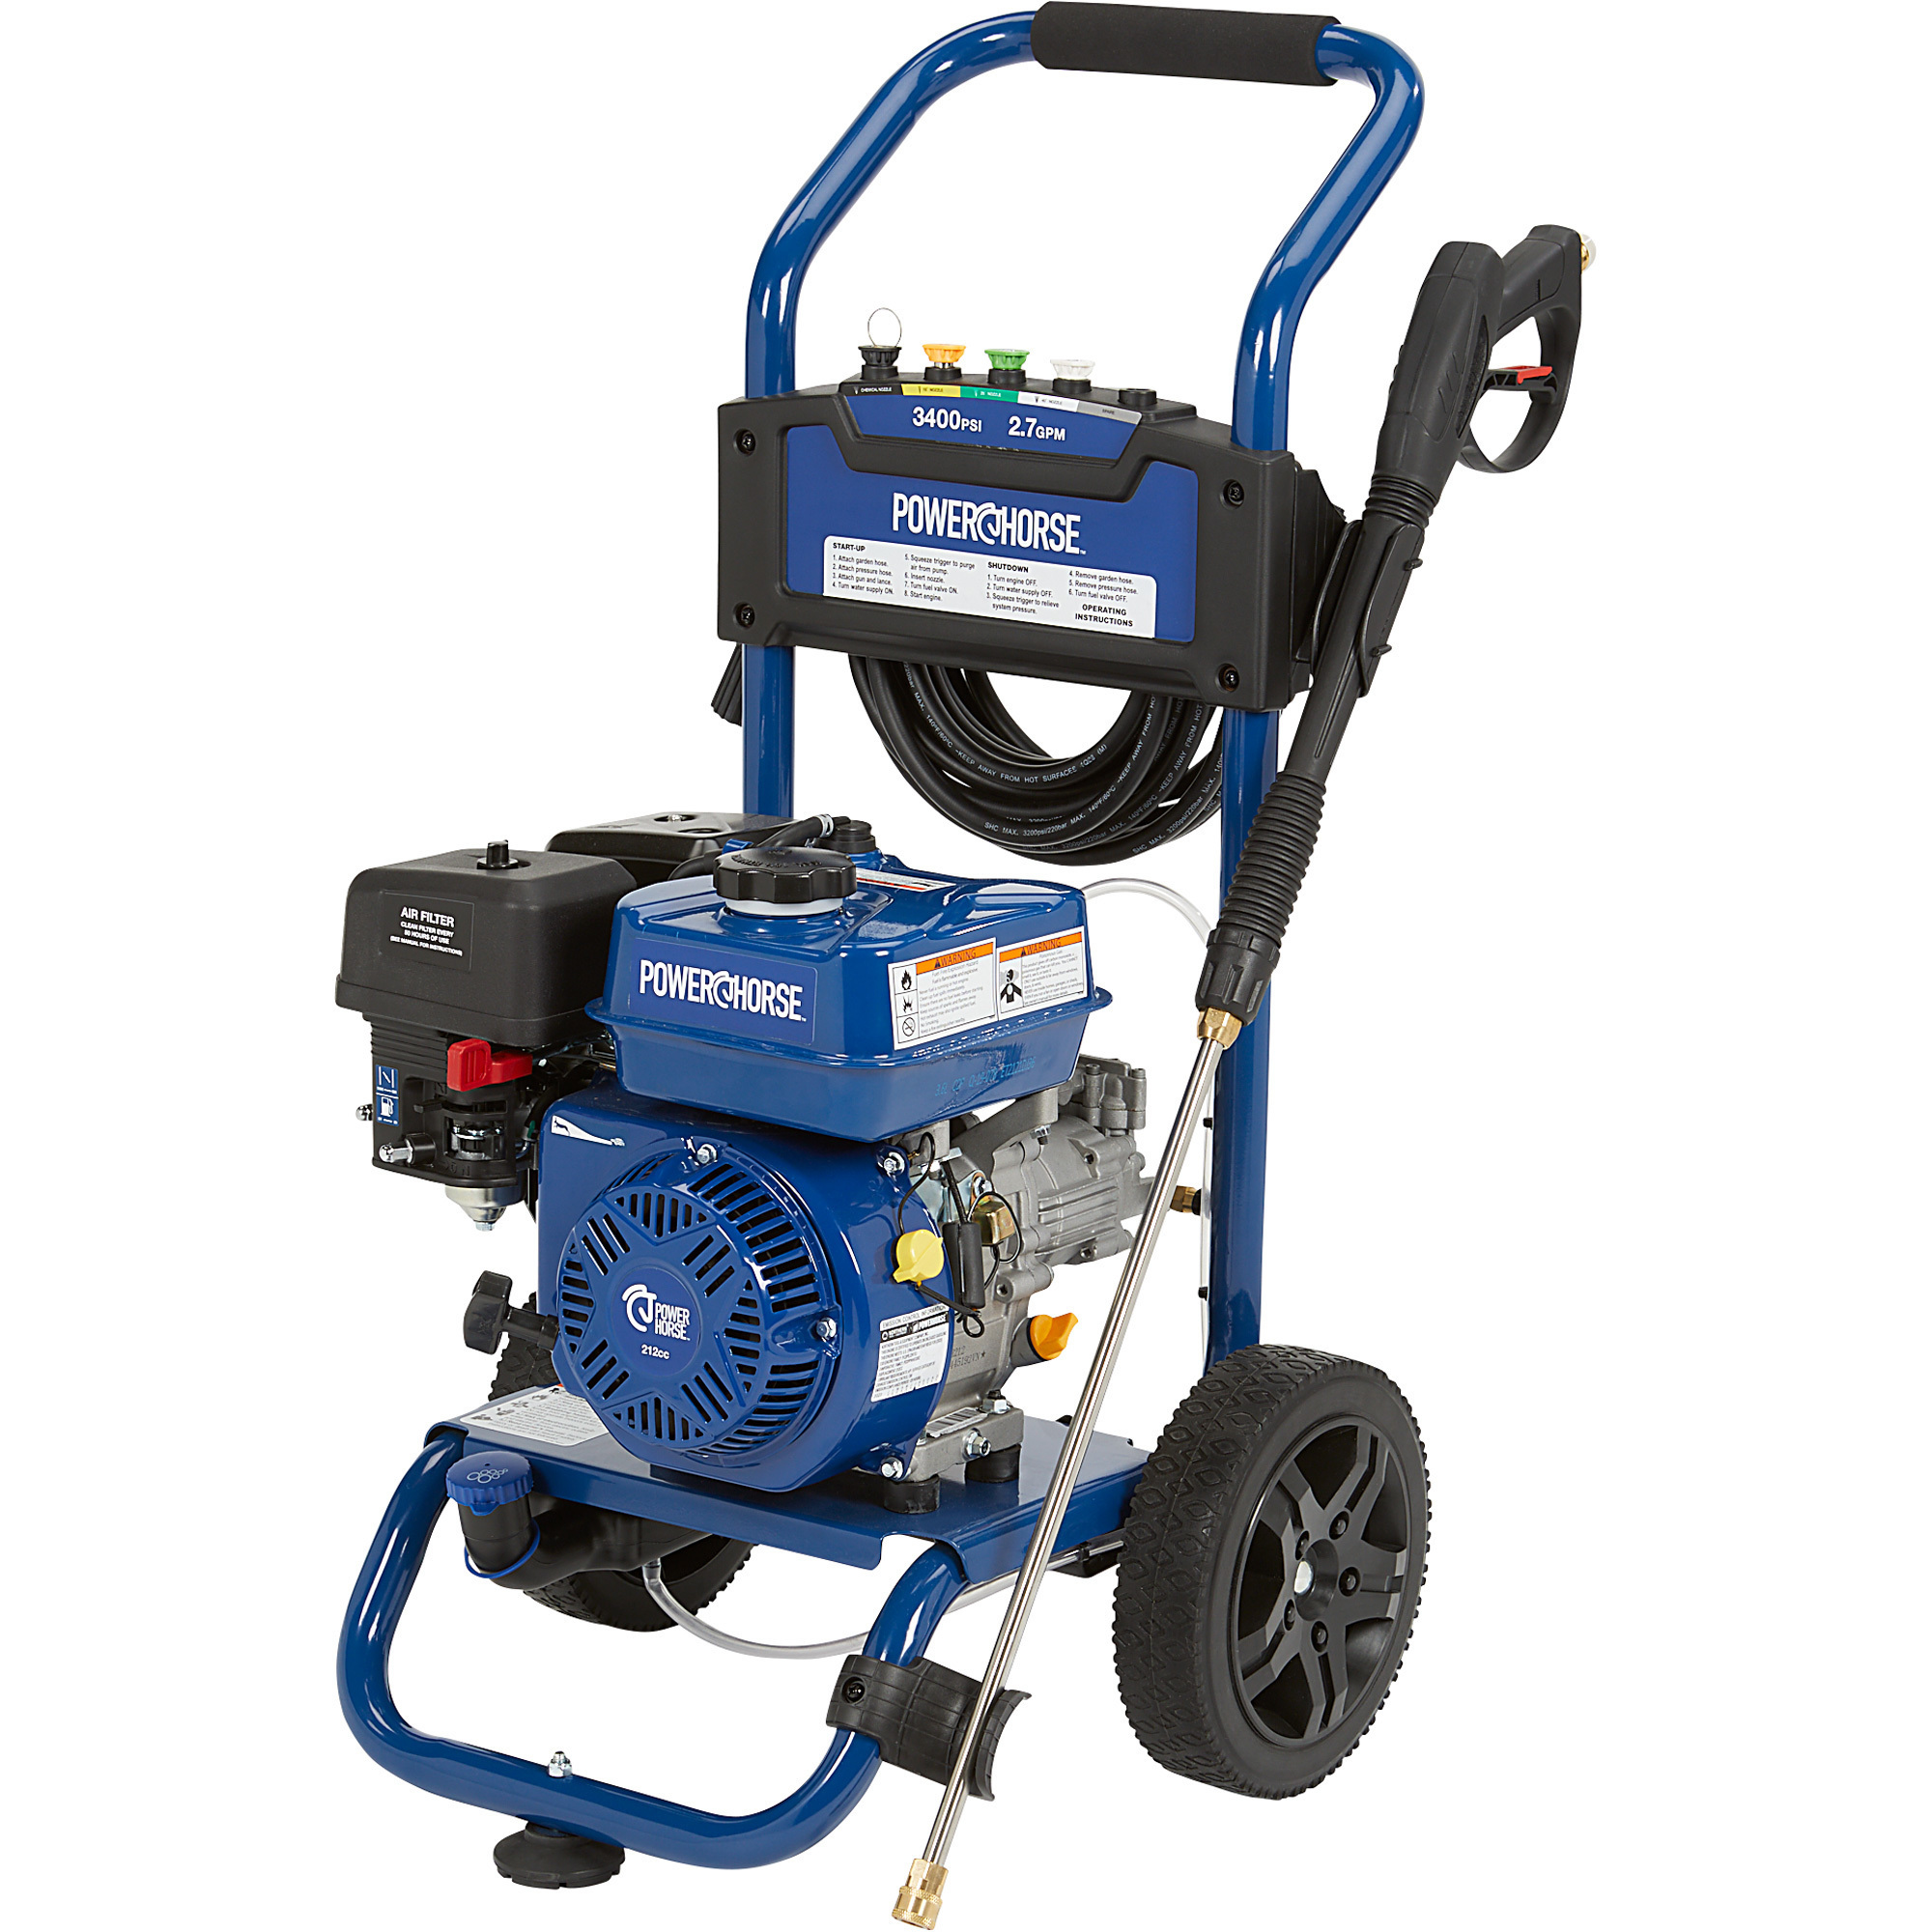 Northern Tools - $20 off Power horse Pressure Washer!